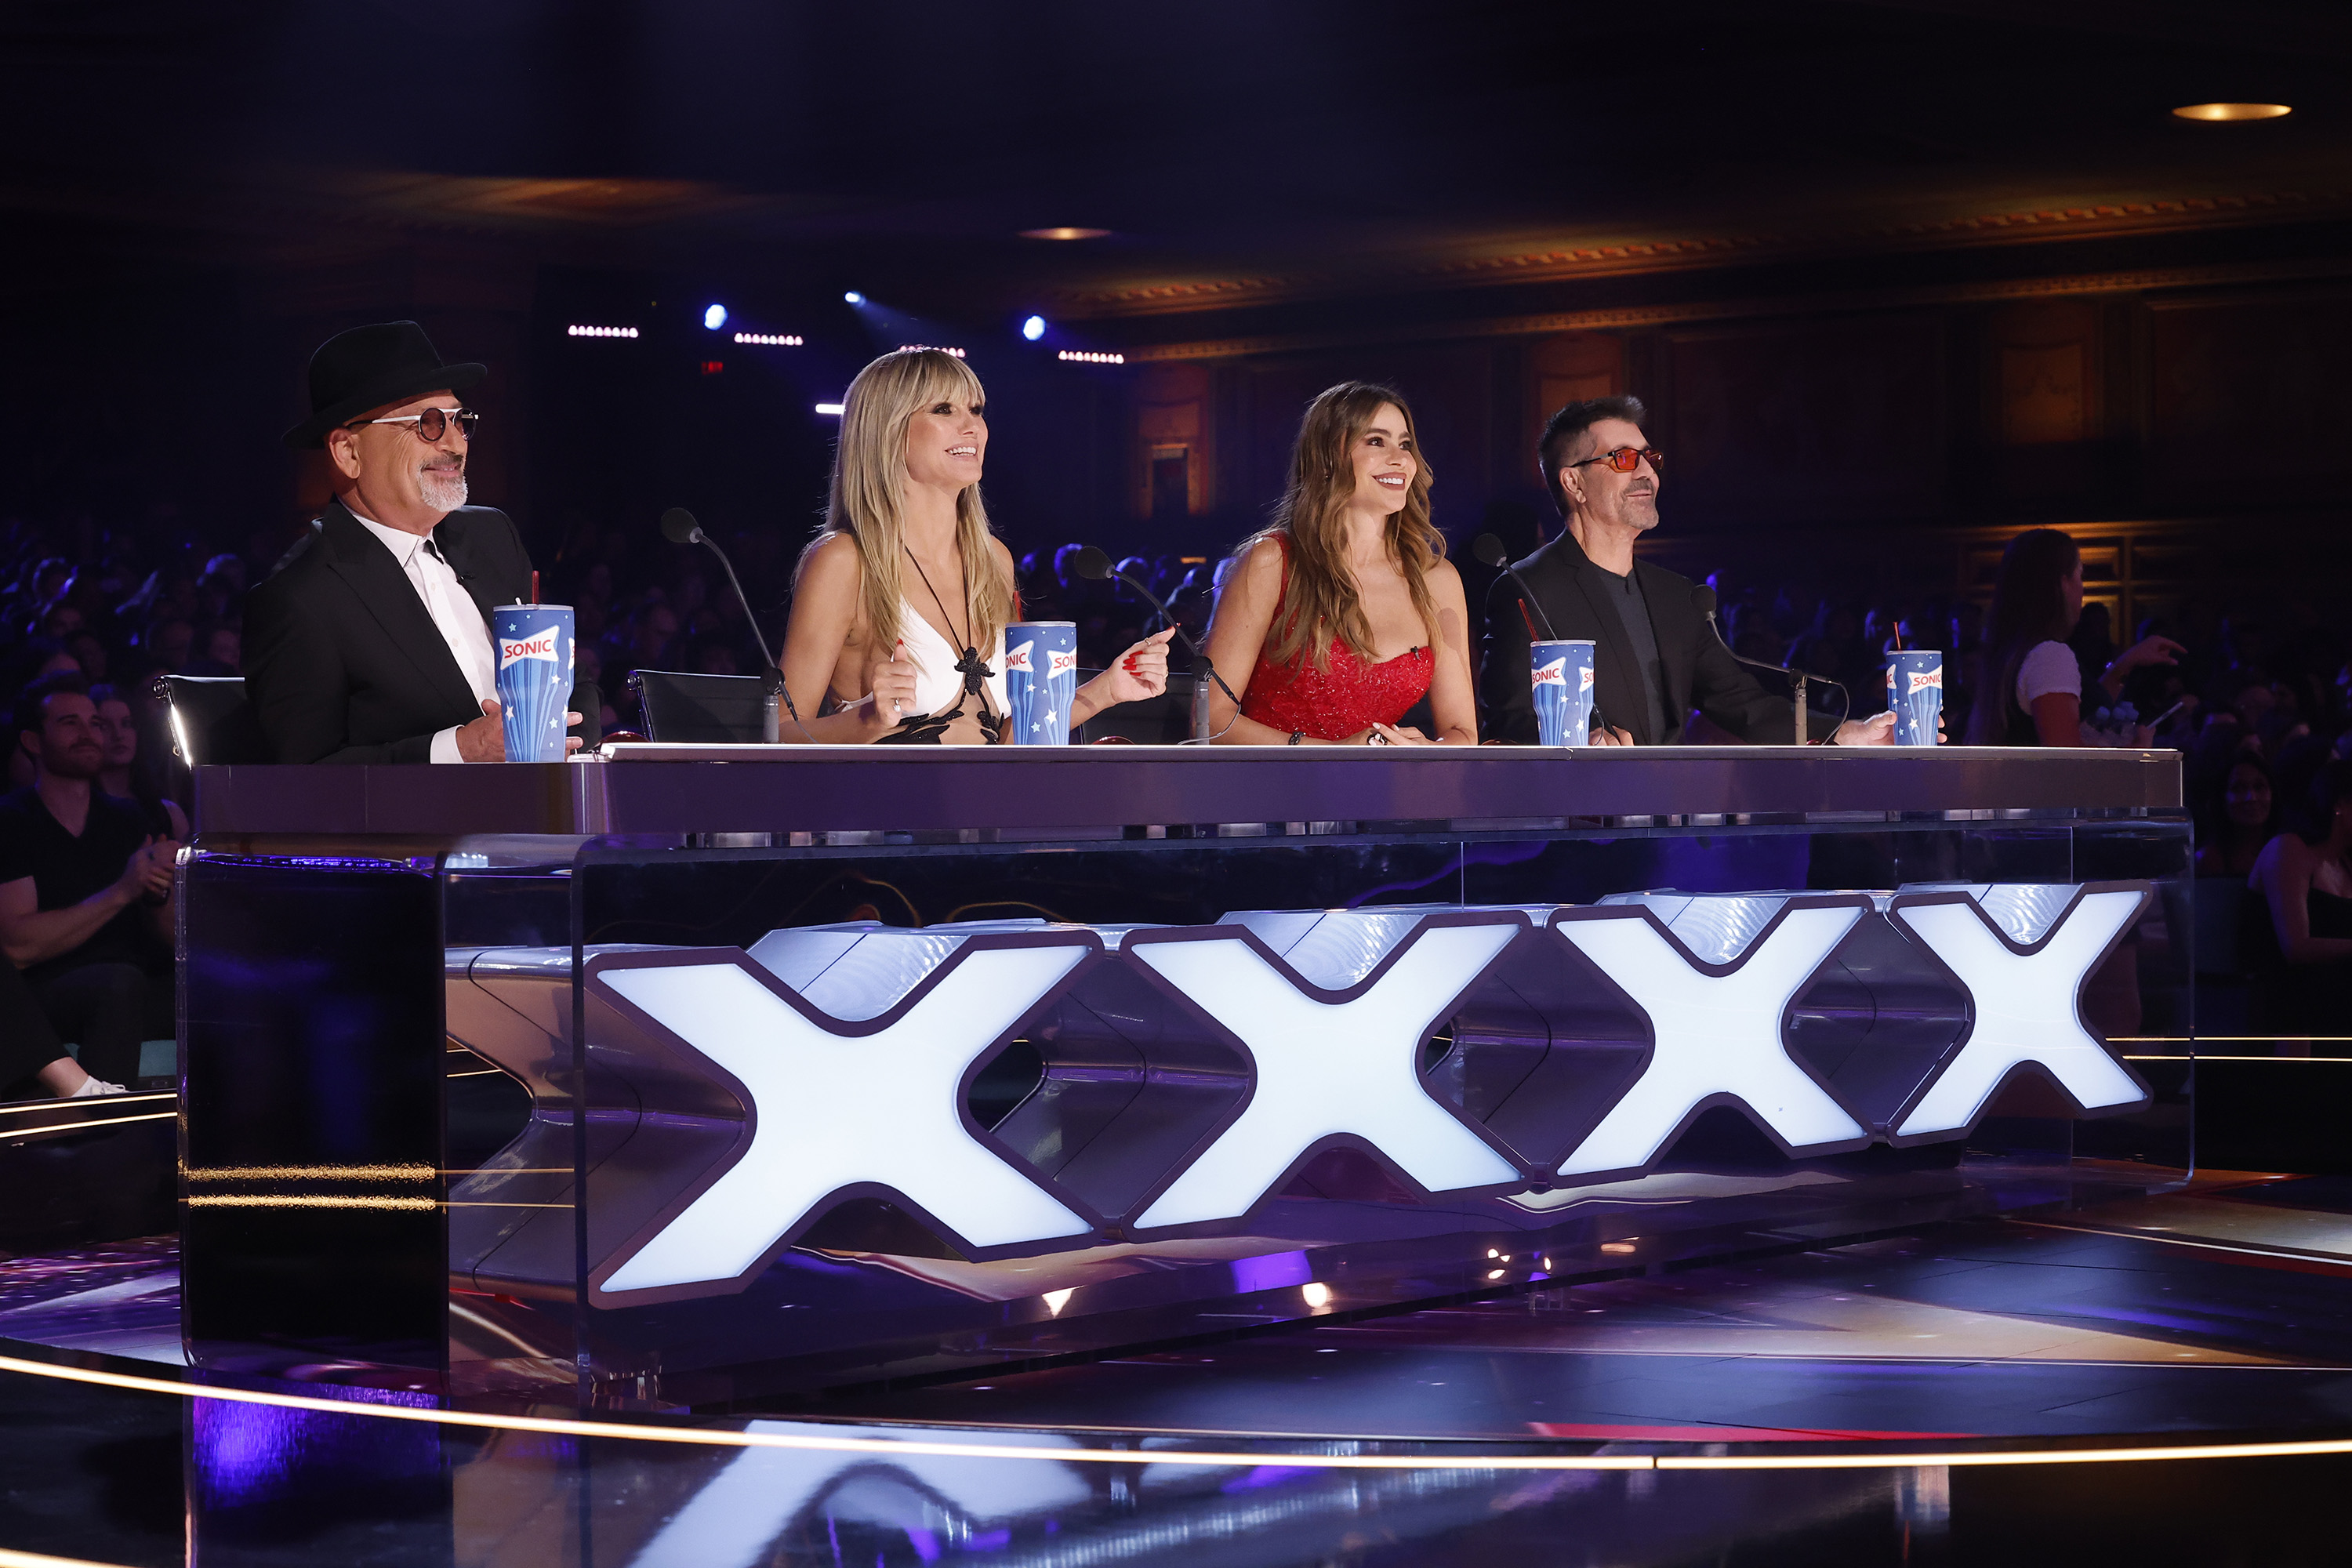 A source claims The Voice is slightly ahead in ratings over AGT